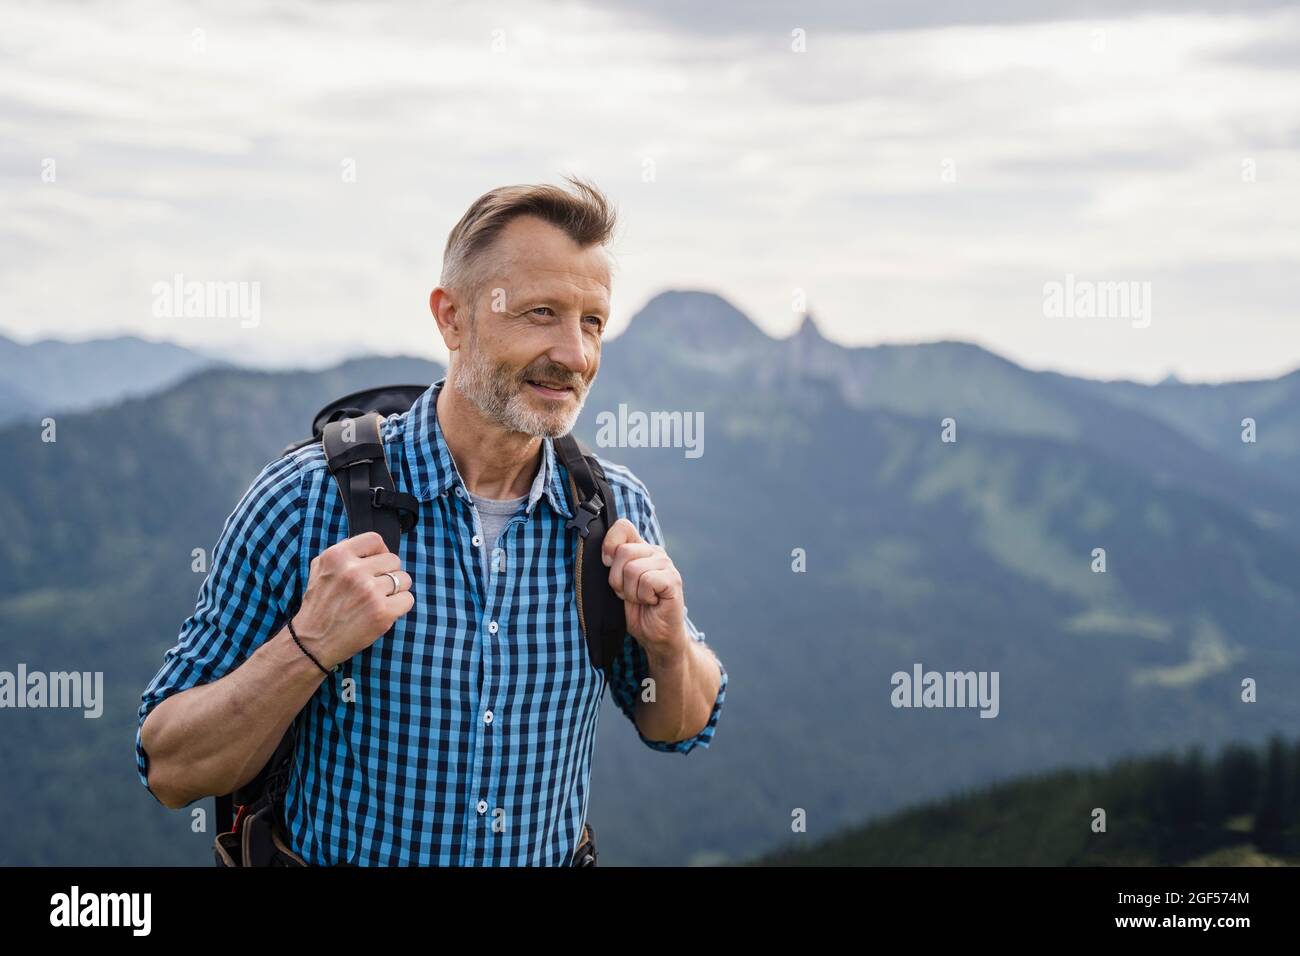 Smiling male backpacker hiking on mountain Stock Photo